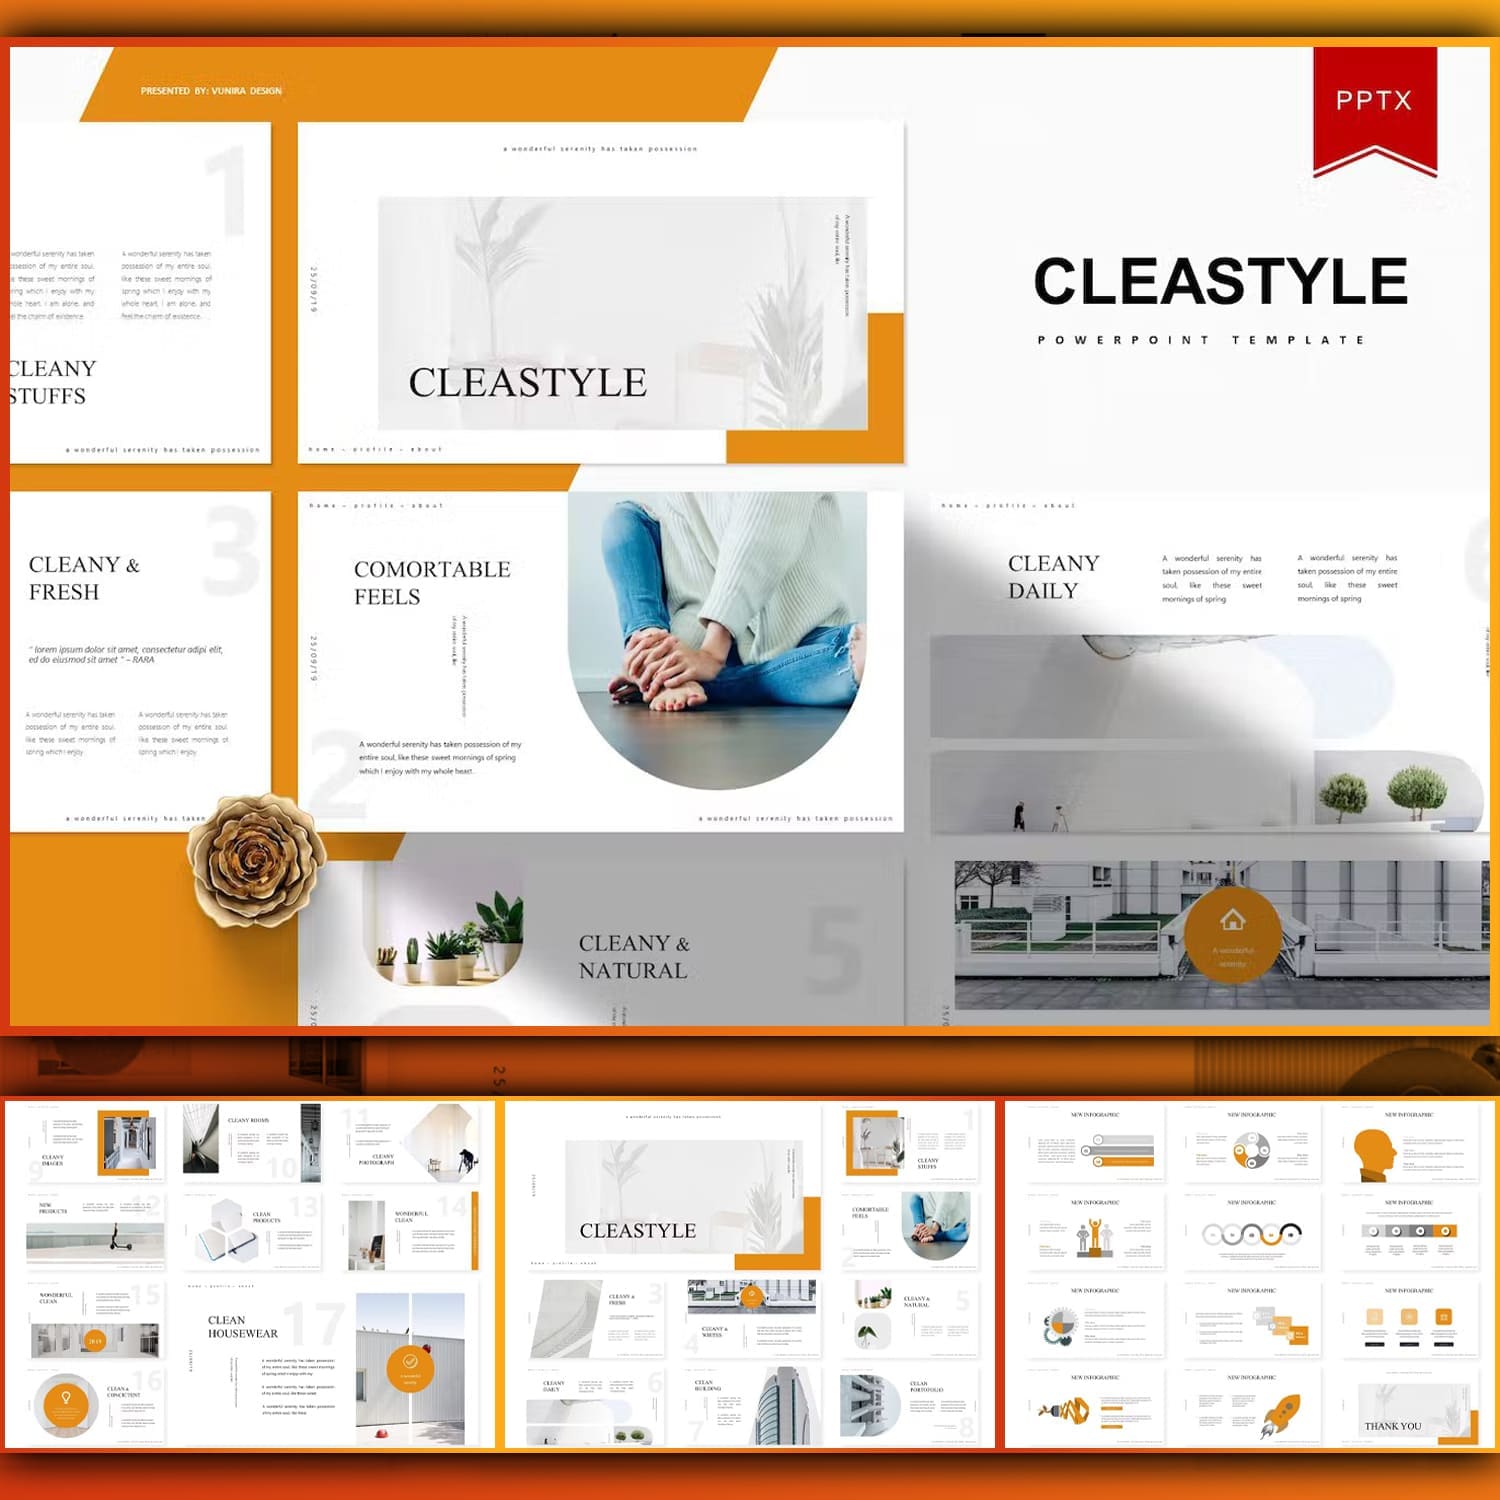 Comfortable feels of Cleastyle Powerpoint template.